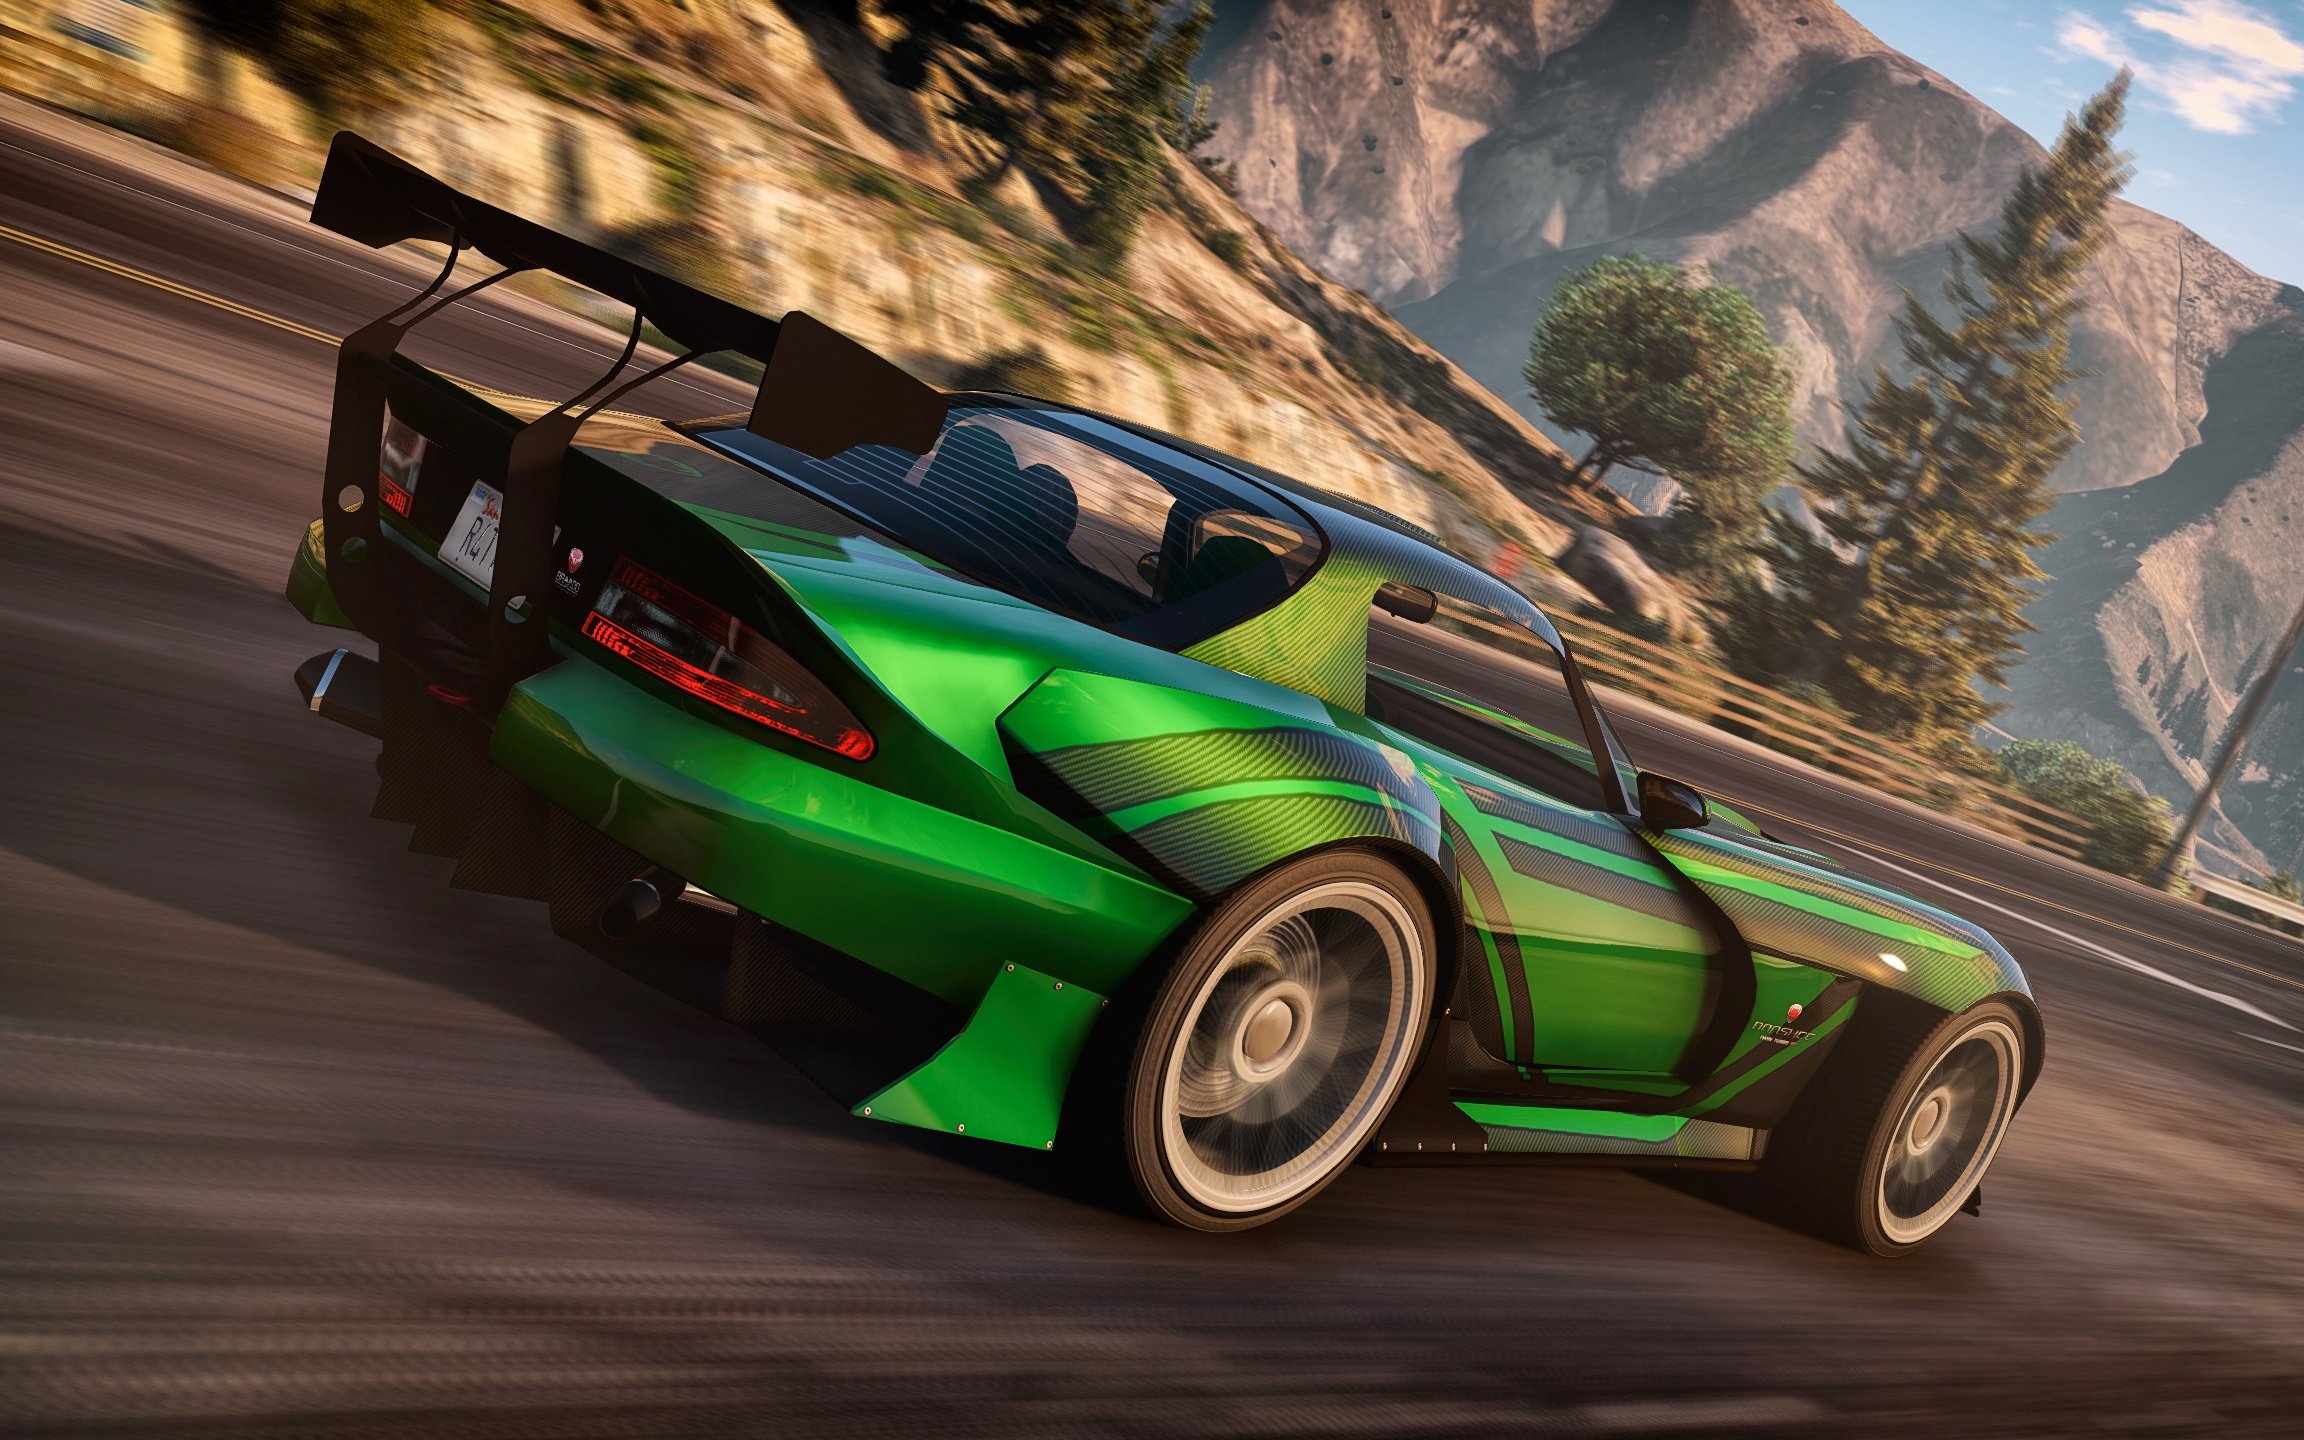 Bravado Banshee 900R is the most Economical on the list as the fastest car in GTA online